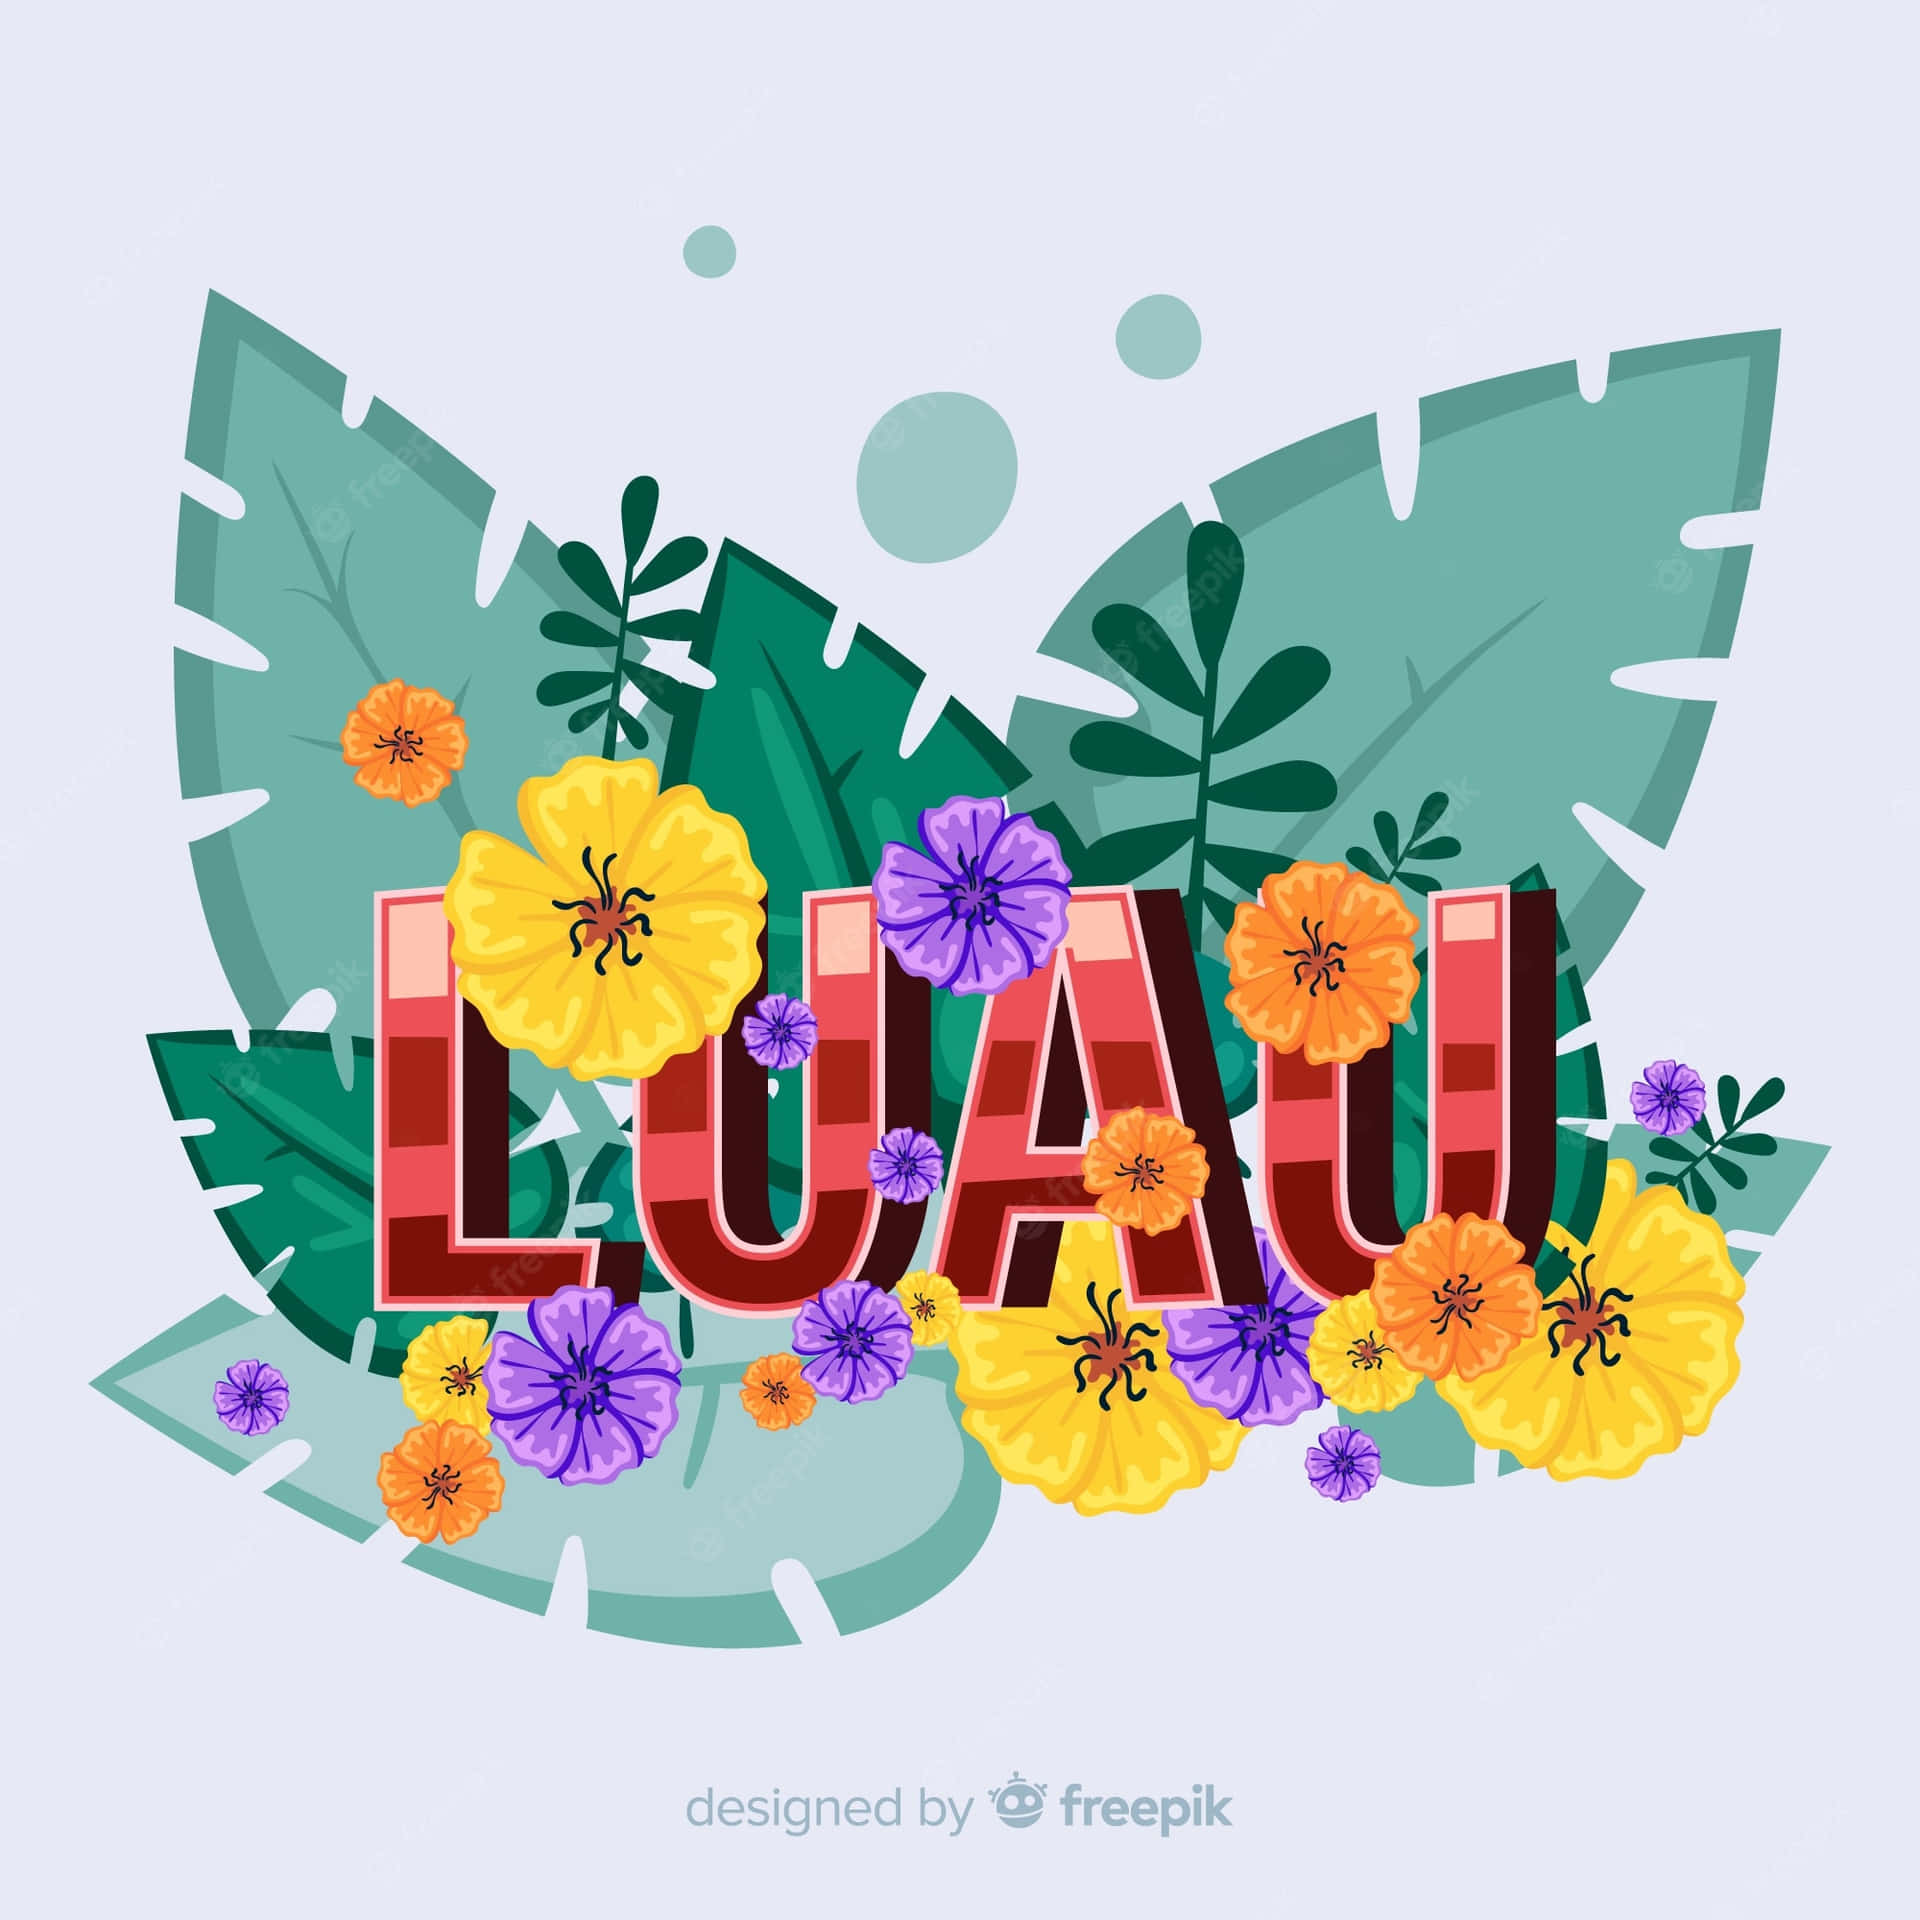 Enjoy the tropical vibes of a luau with vibrant colors.